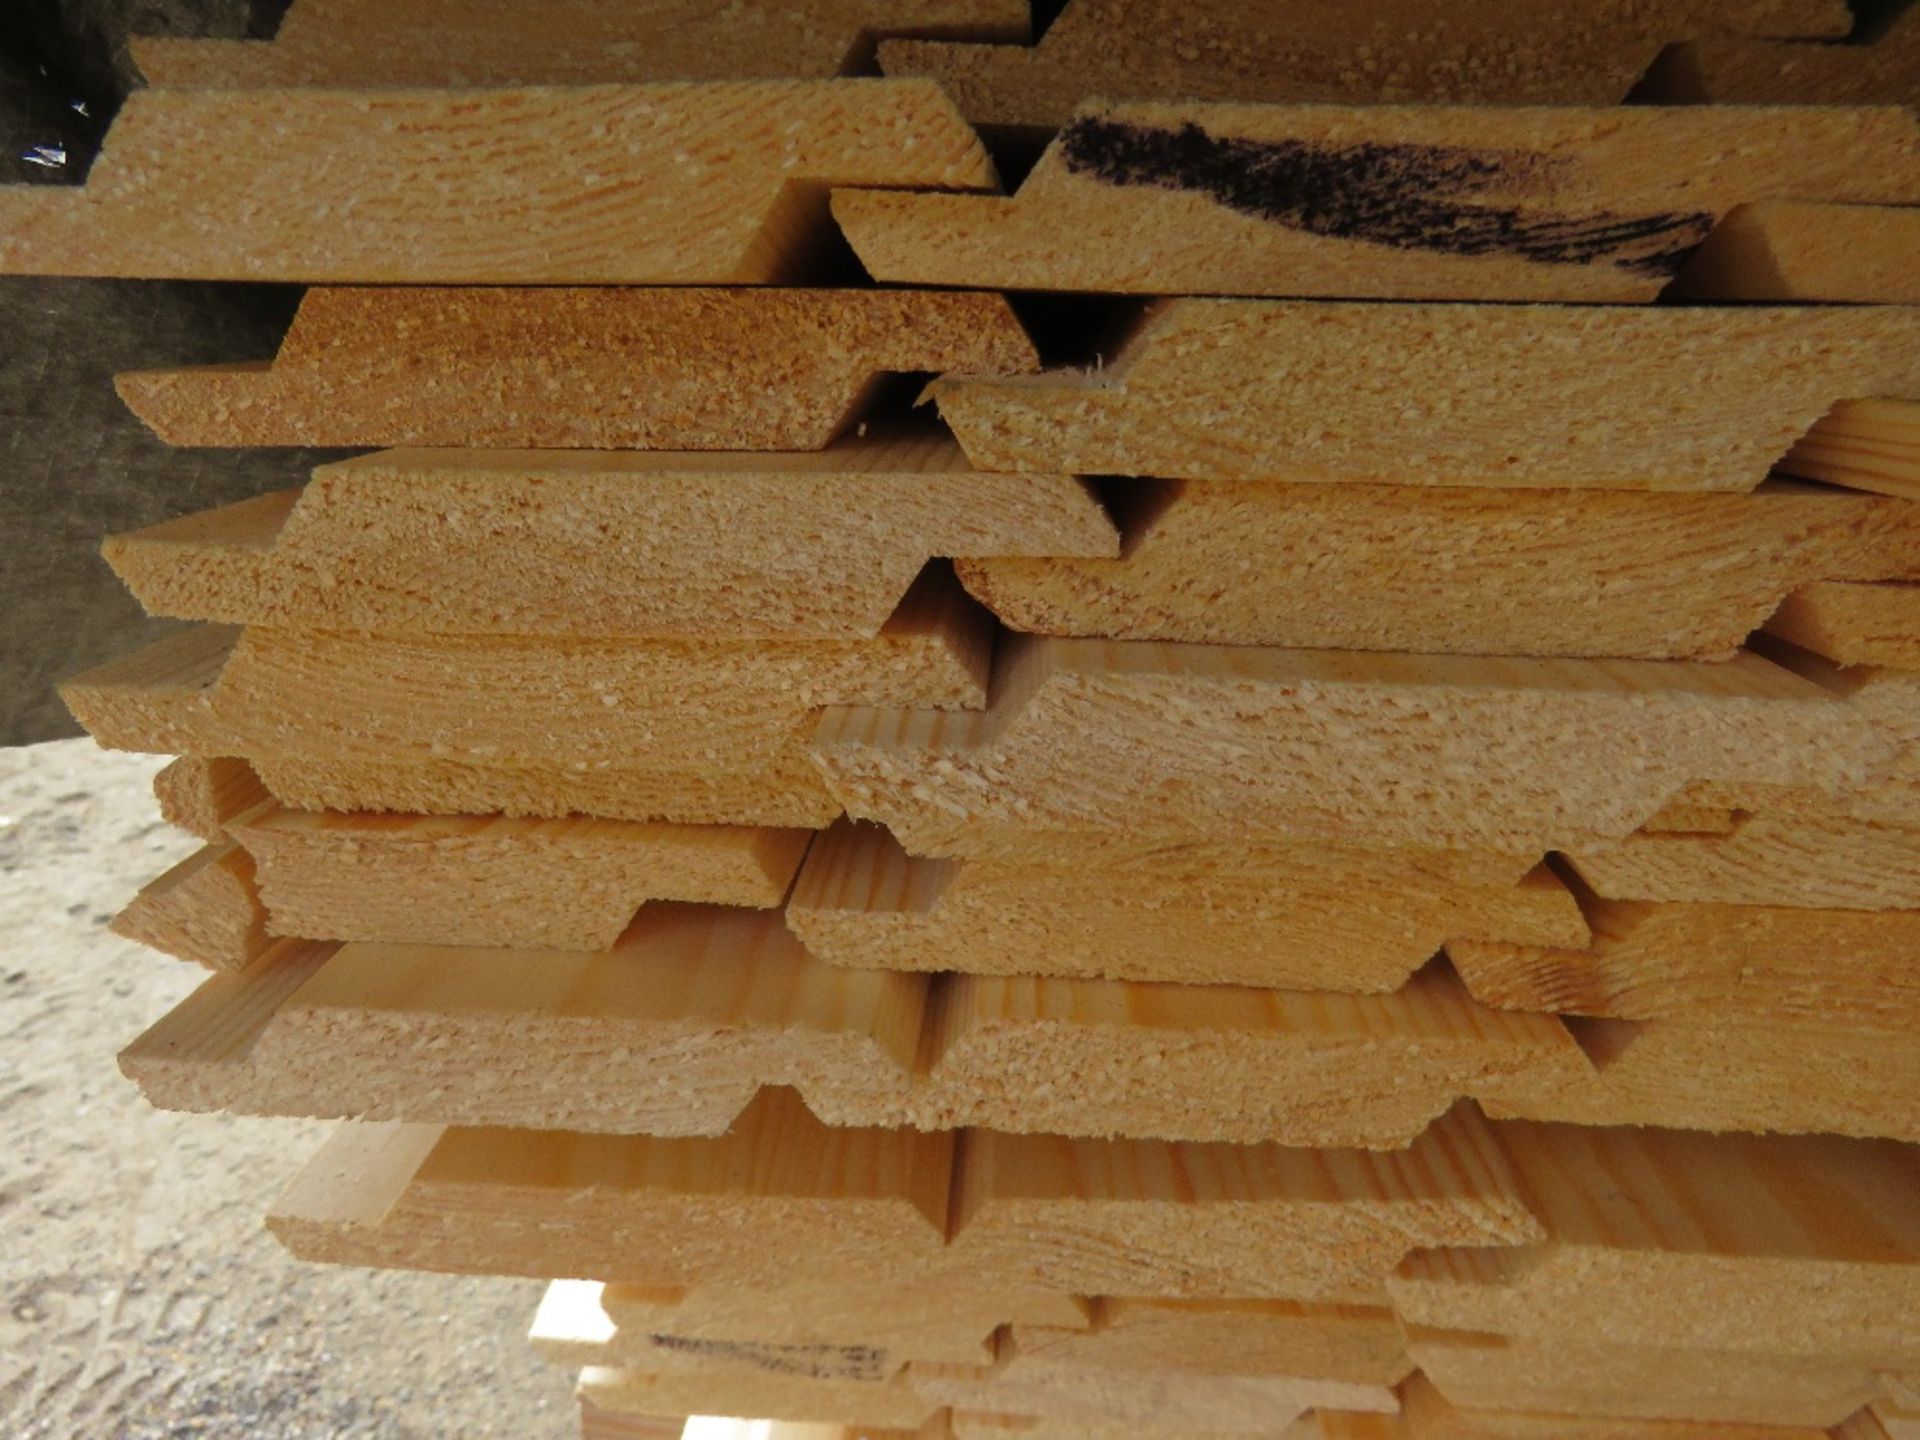 STACK OF 4 BUNDLES OF MIXED TIMBER FENCE CLADDING BOARDS. - Image 6 of 6